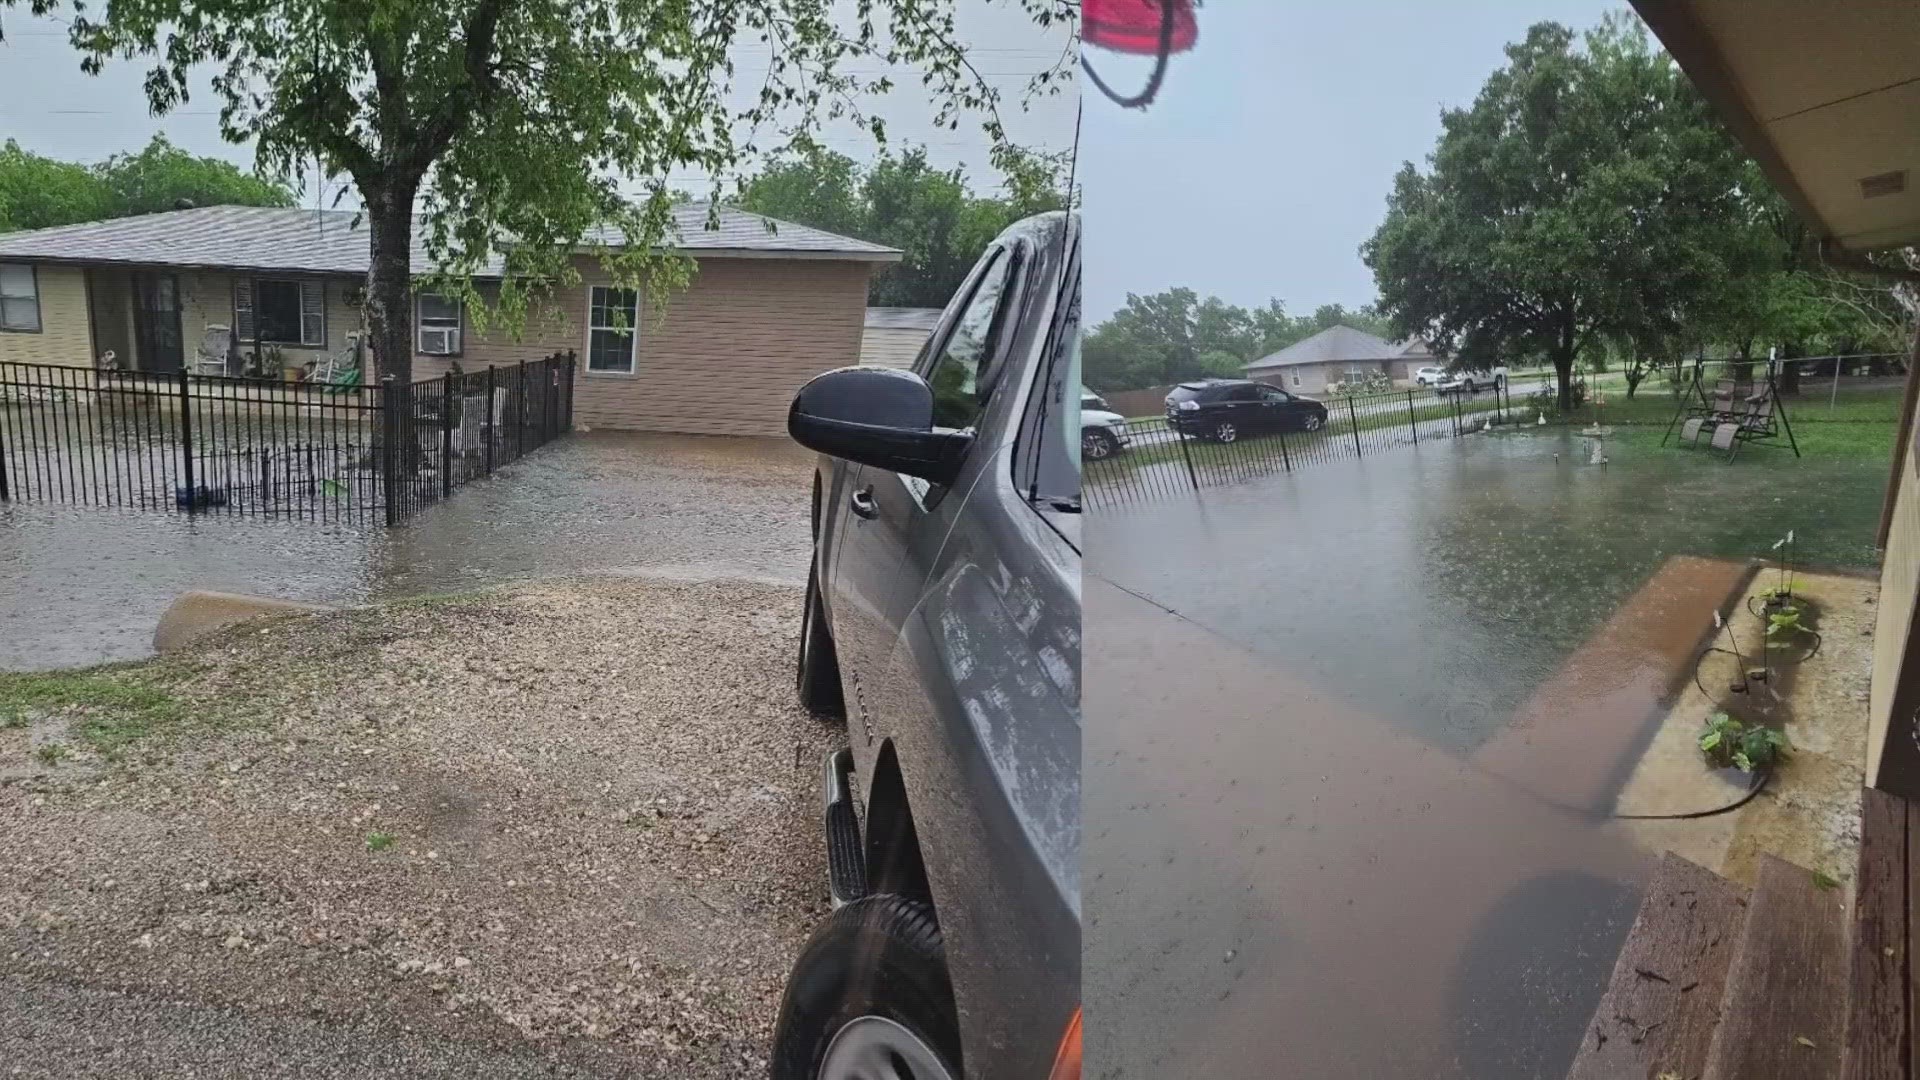 Cindi Watts and her husband David told 6 News they have been dealing with water drainage issues since the Lake Pointe subdivision was built over two years ago.